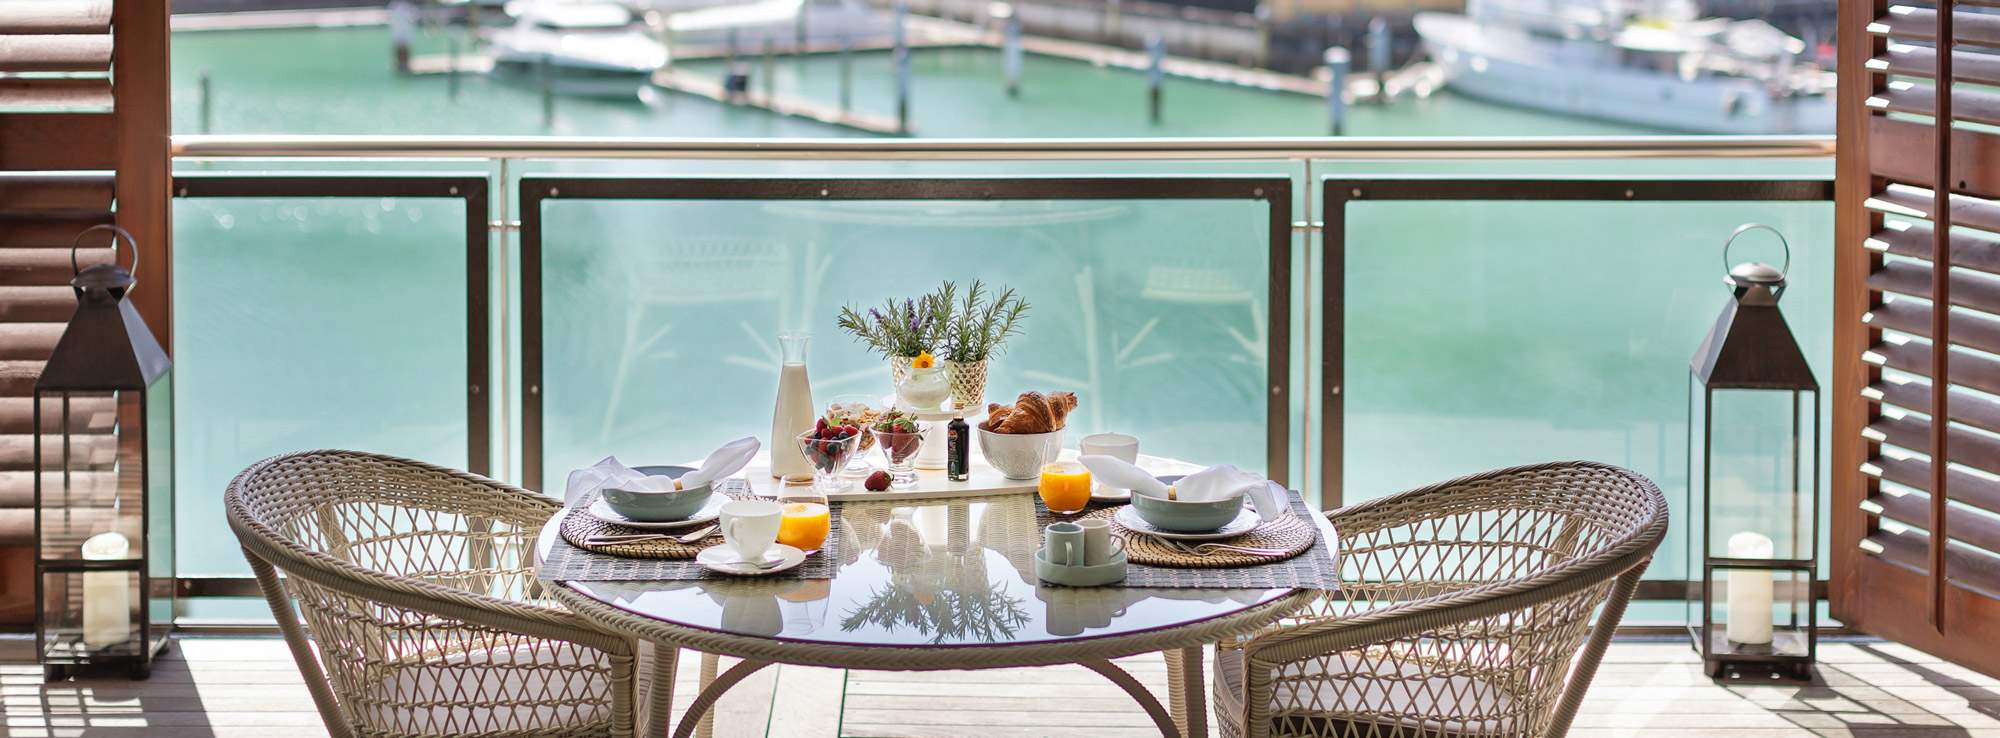 Luxury Breakfast Setting, Modern Cane Furniture & Harbour views | Point Residence Luxury Auckland Waterfront Accommodation